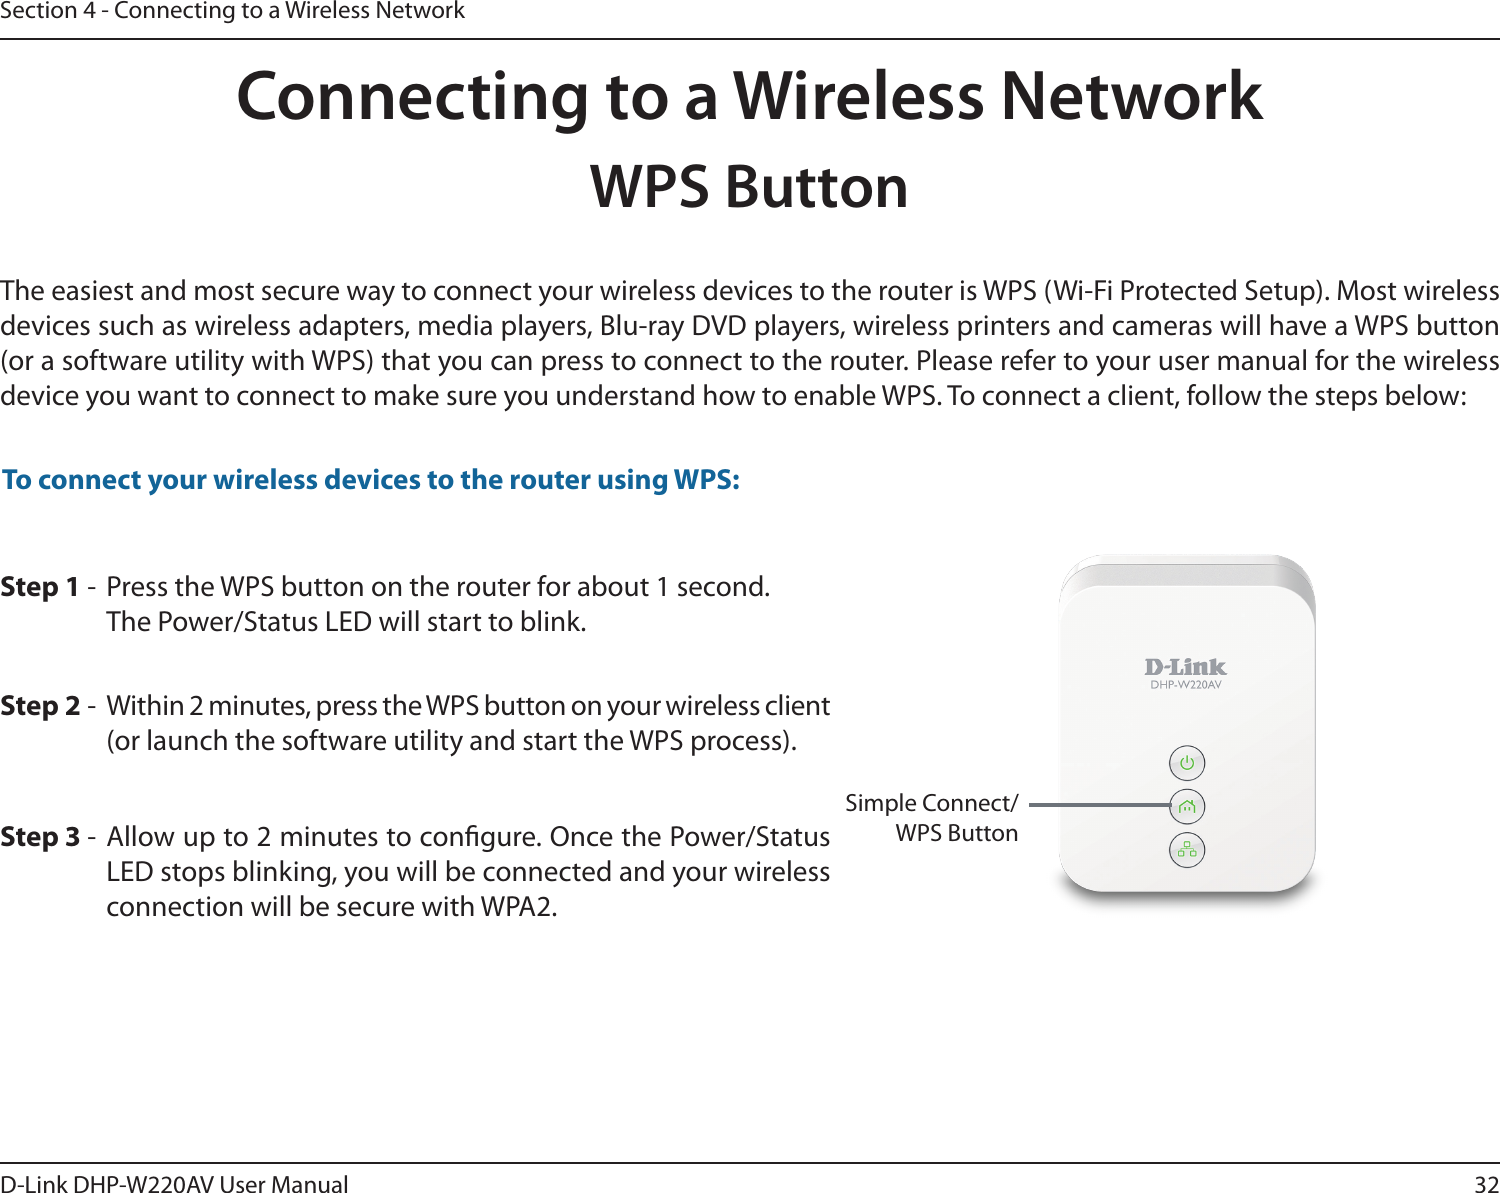 32D-Link DHP-W220AV User ManualSection 4 - Connecting to a Wireless NetworkStep 2 -  Within 2 minutes, press the WPS button on your wireless client (or launch the software utility and start the WPS process).Step 1 -  Press the WPS button on the router for about 1 second. The Power/Status LED will start to blink.Step 3 - Allow up to 2 minutes to congure. Once the Power/Status LED stops blinking, you will be connected and your wireless connection will be secure with WPA2.To connect your wireless devices to the router using WPS:Connecting to a Wireless NetworkWPS ButtonThe easiest and most secure way to connect your wireless devices to the router is WPS (Wi-Fi Protected Setup). Most wireless devices such as wireless adapters, media players, Blu-ray DVD players, wireless printers and cameras will have a WPS button (or a software utility with WPS) that you can press to connect to the router. Please refer to your user manual for the wireless device you want to connect to make sure you understand how to enable WPS. To connect a client, follow the steps below:Simple Connect/WPS Button